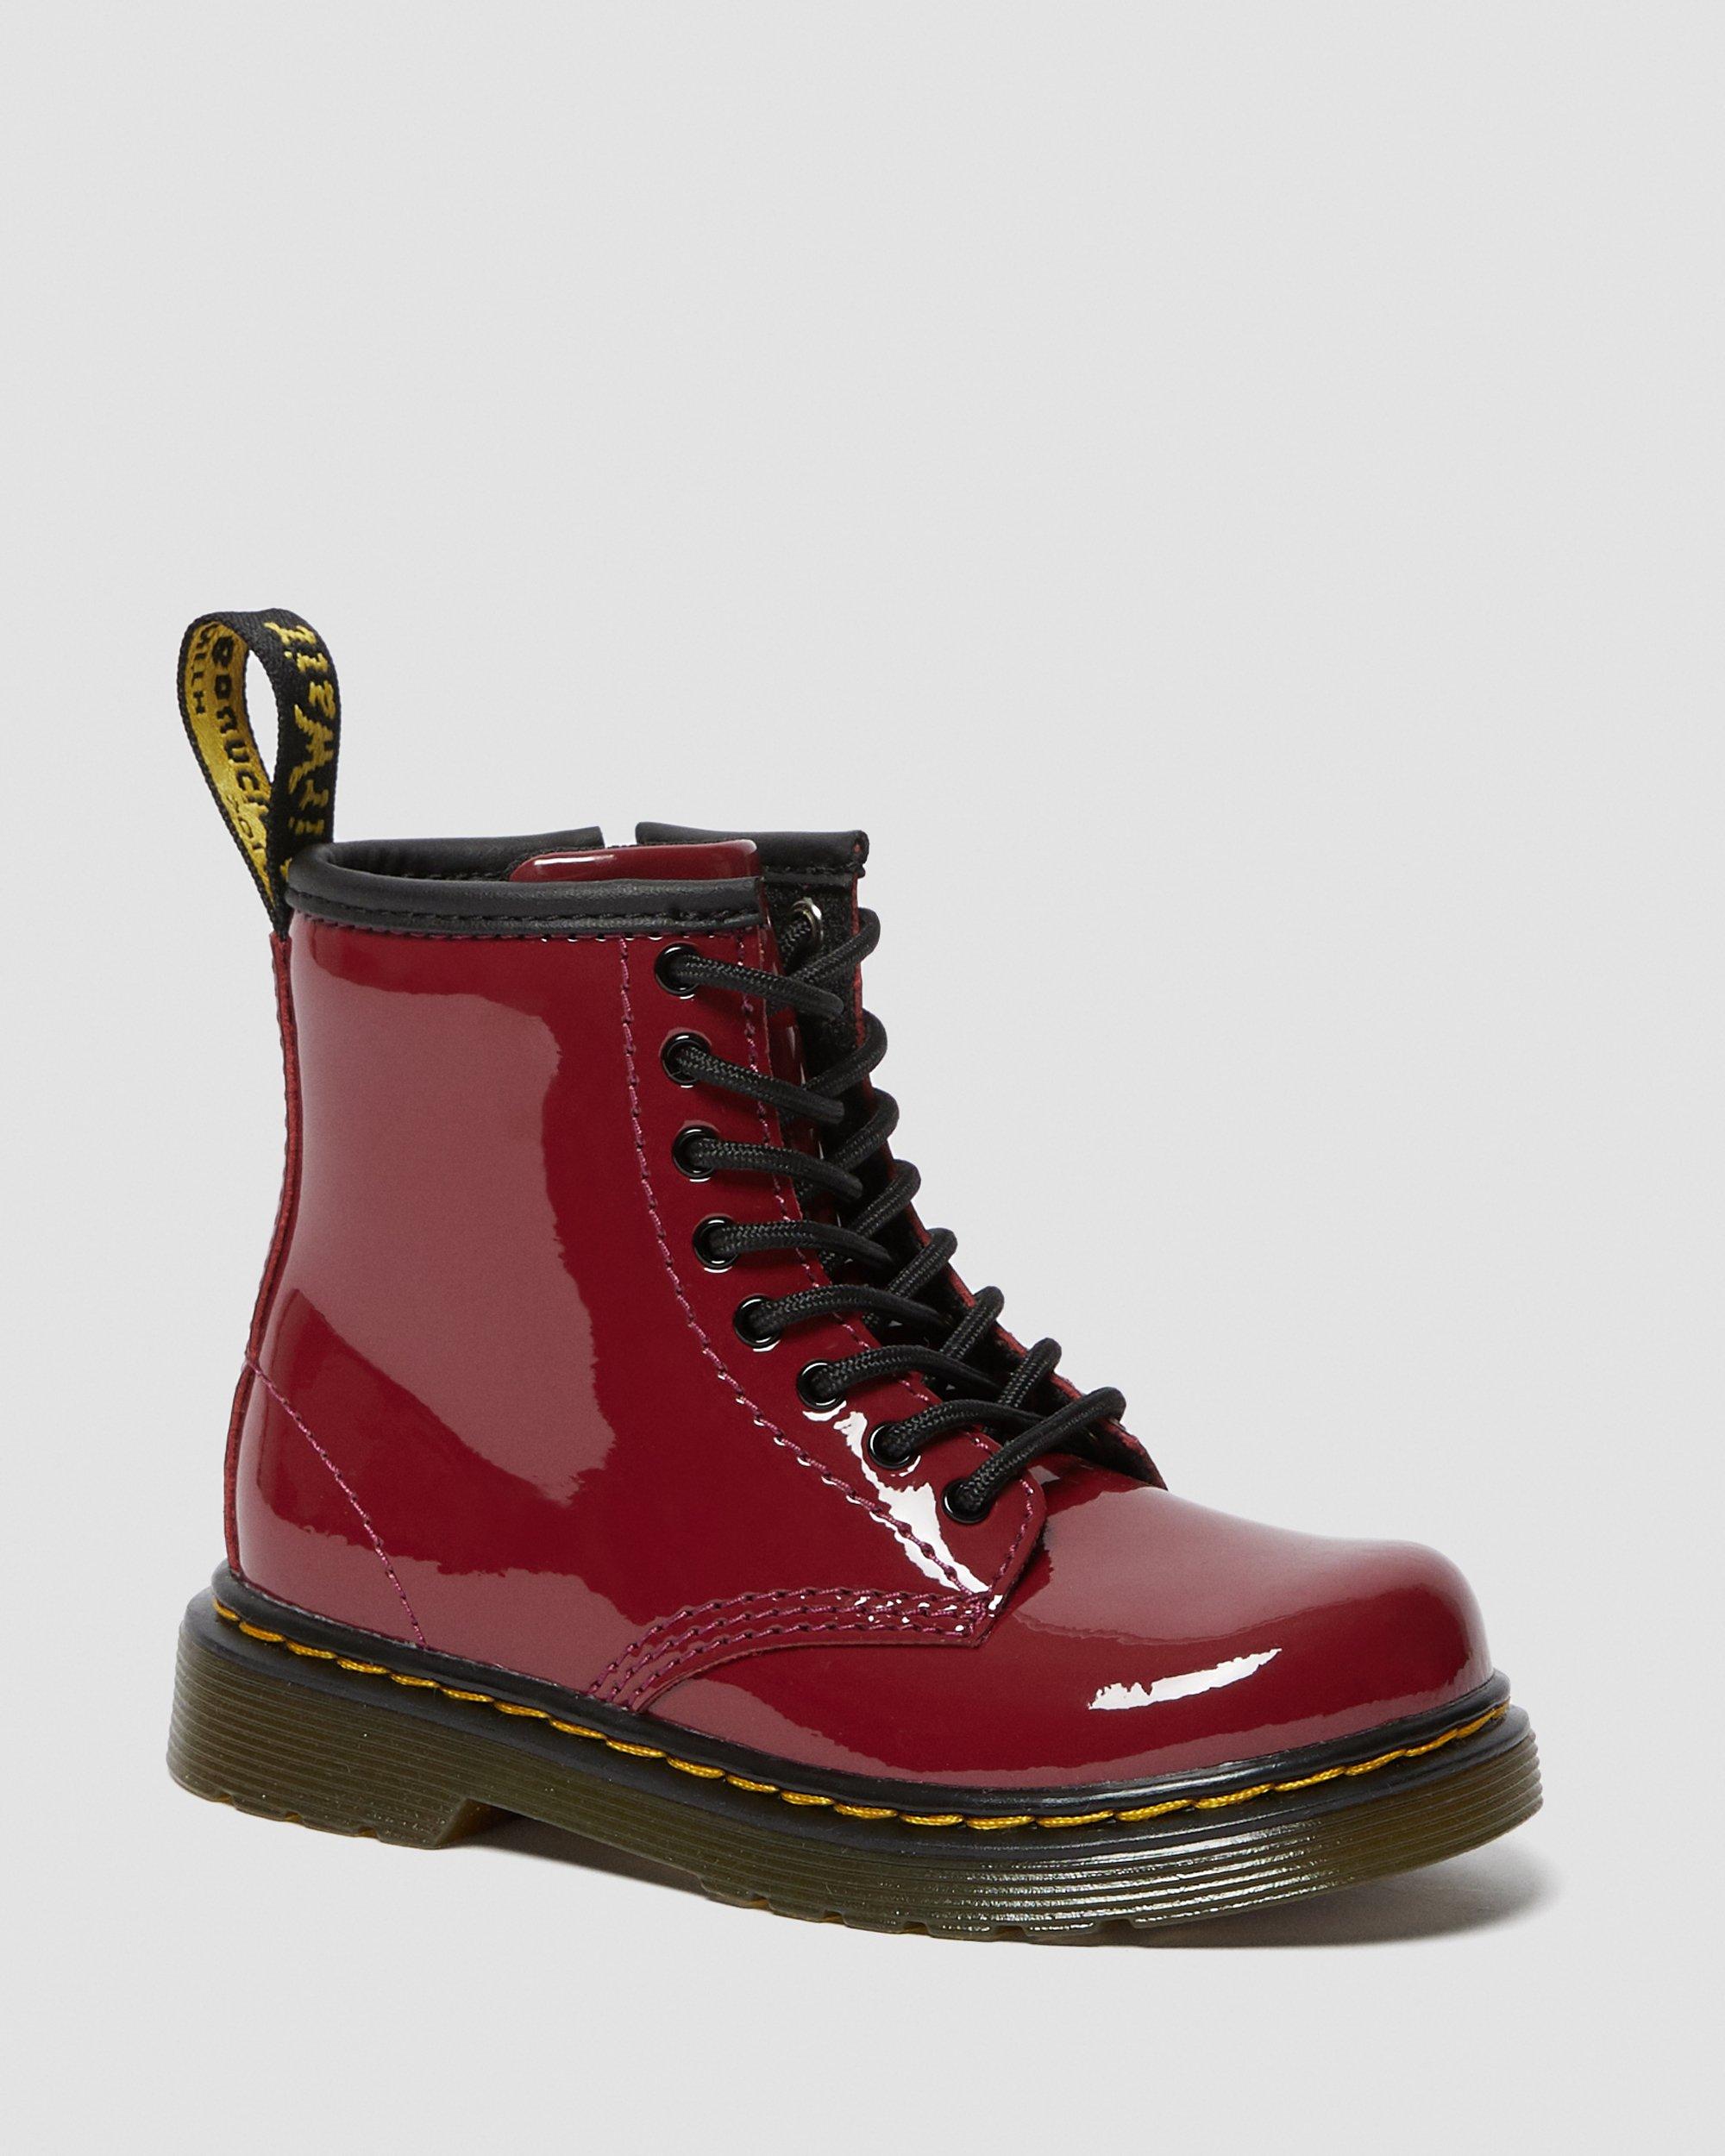 toddlers red boots